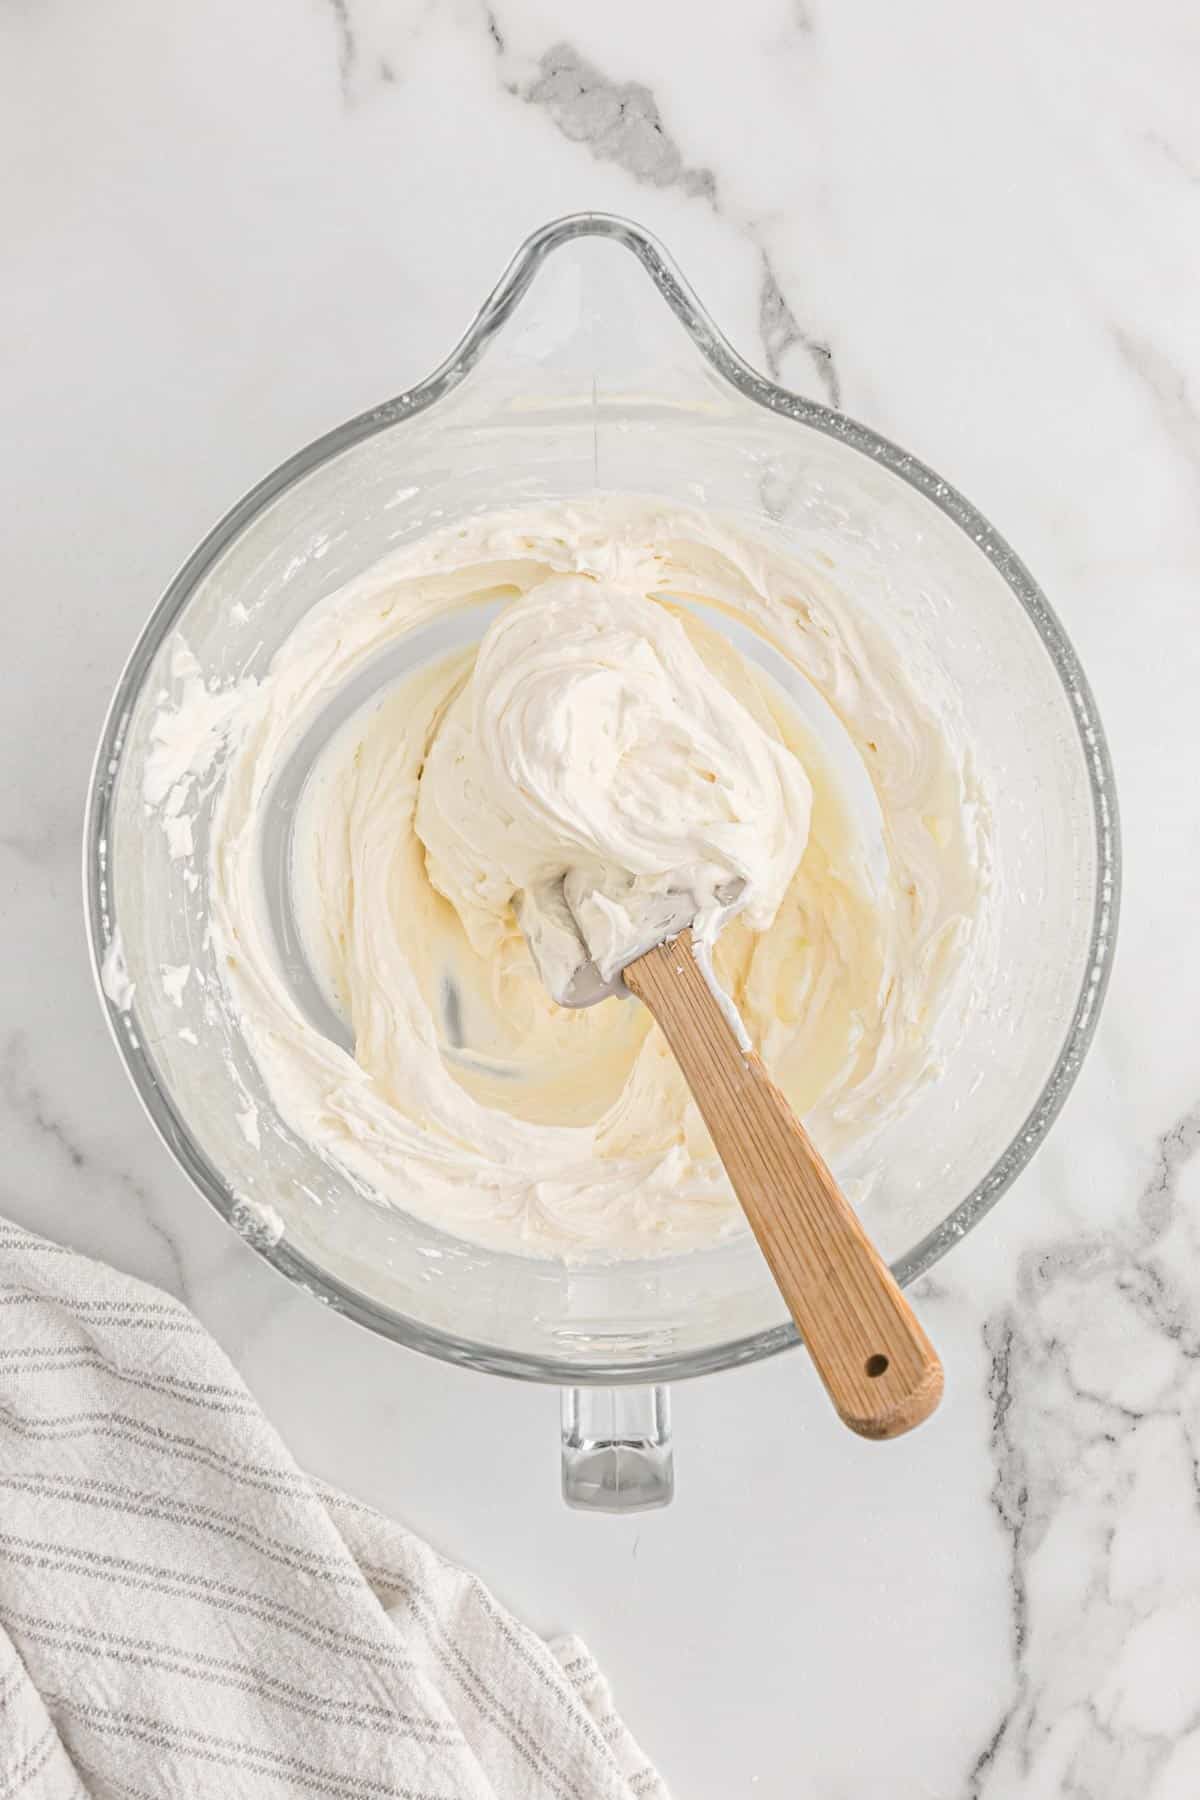 American buttercream in a mixing bowl with a wooden spoon.